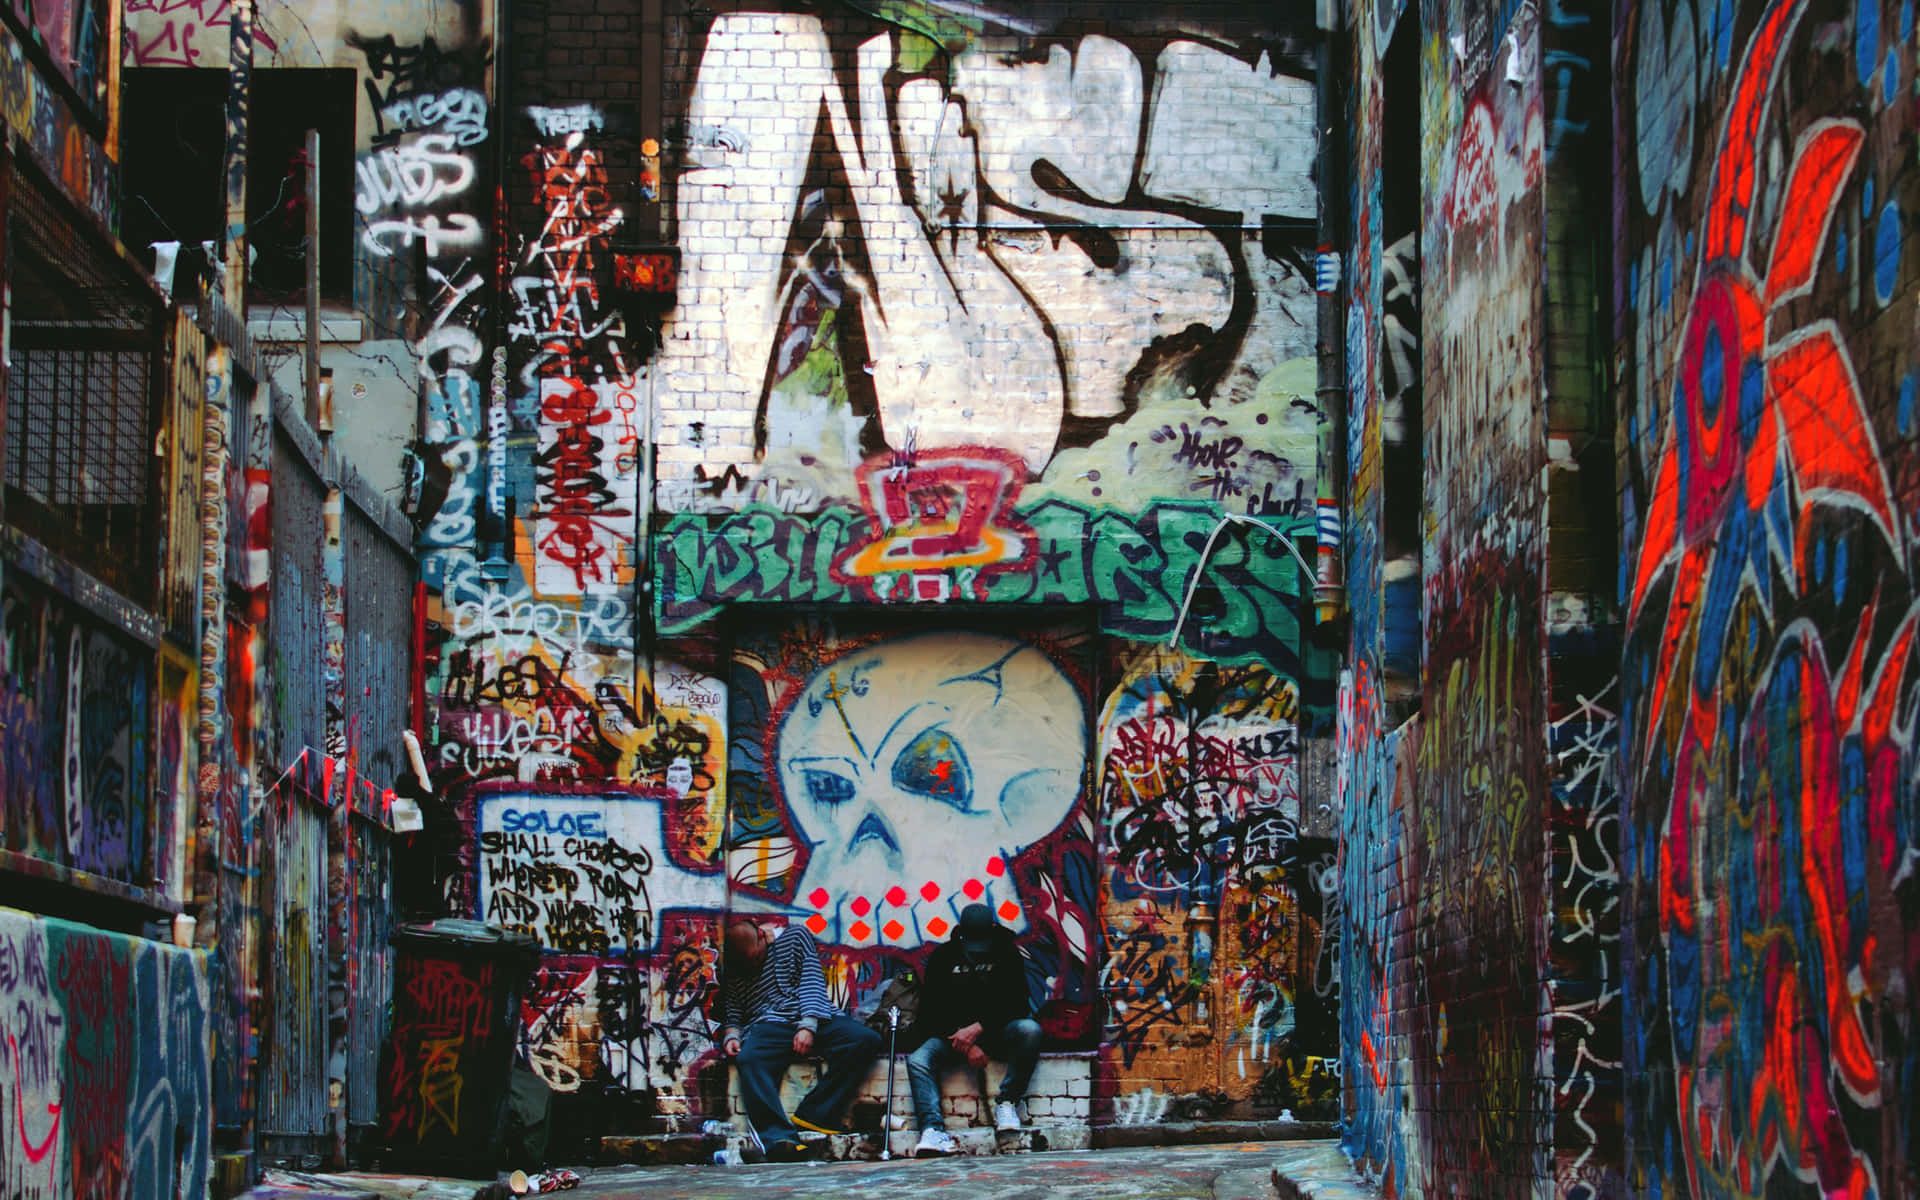 Two people sitting on a bench in a graffiti-covered alleyway - Street art